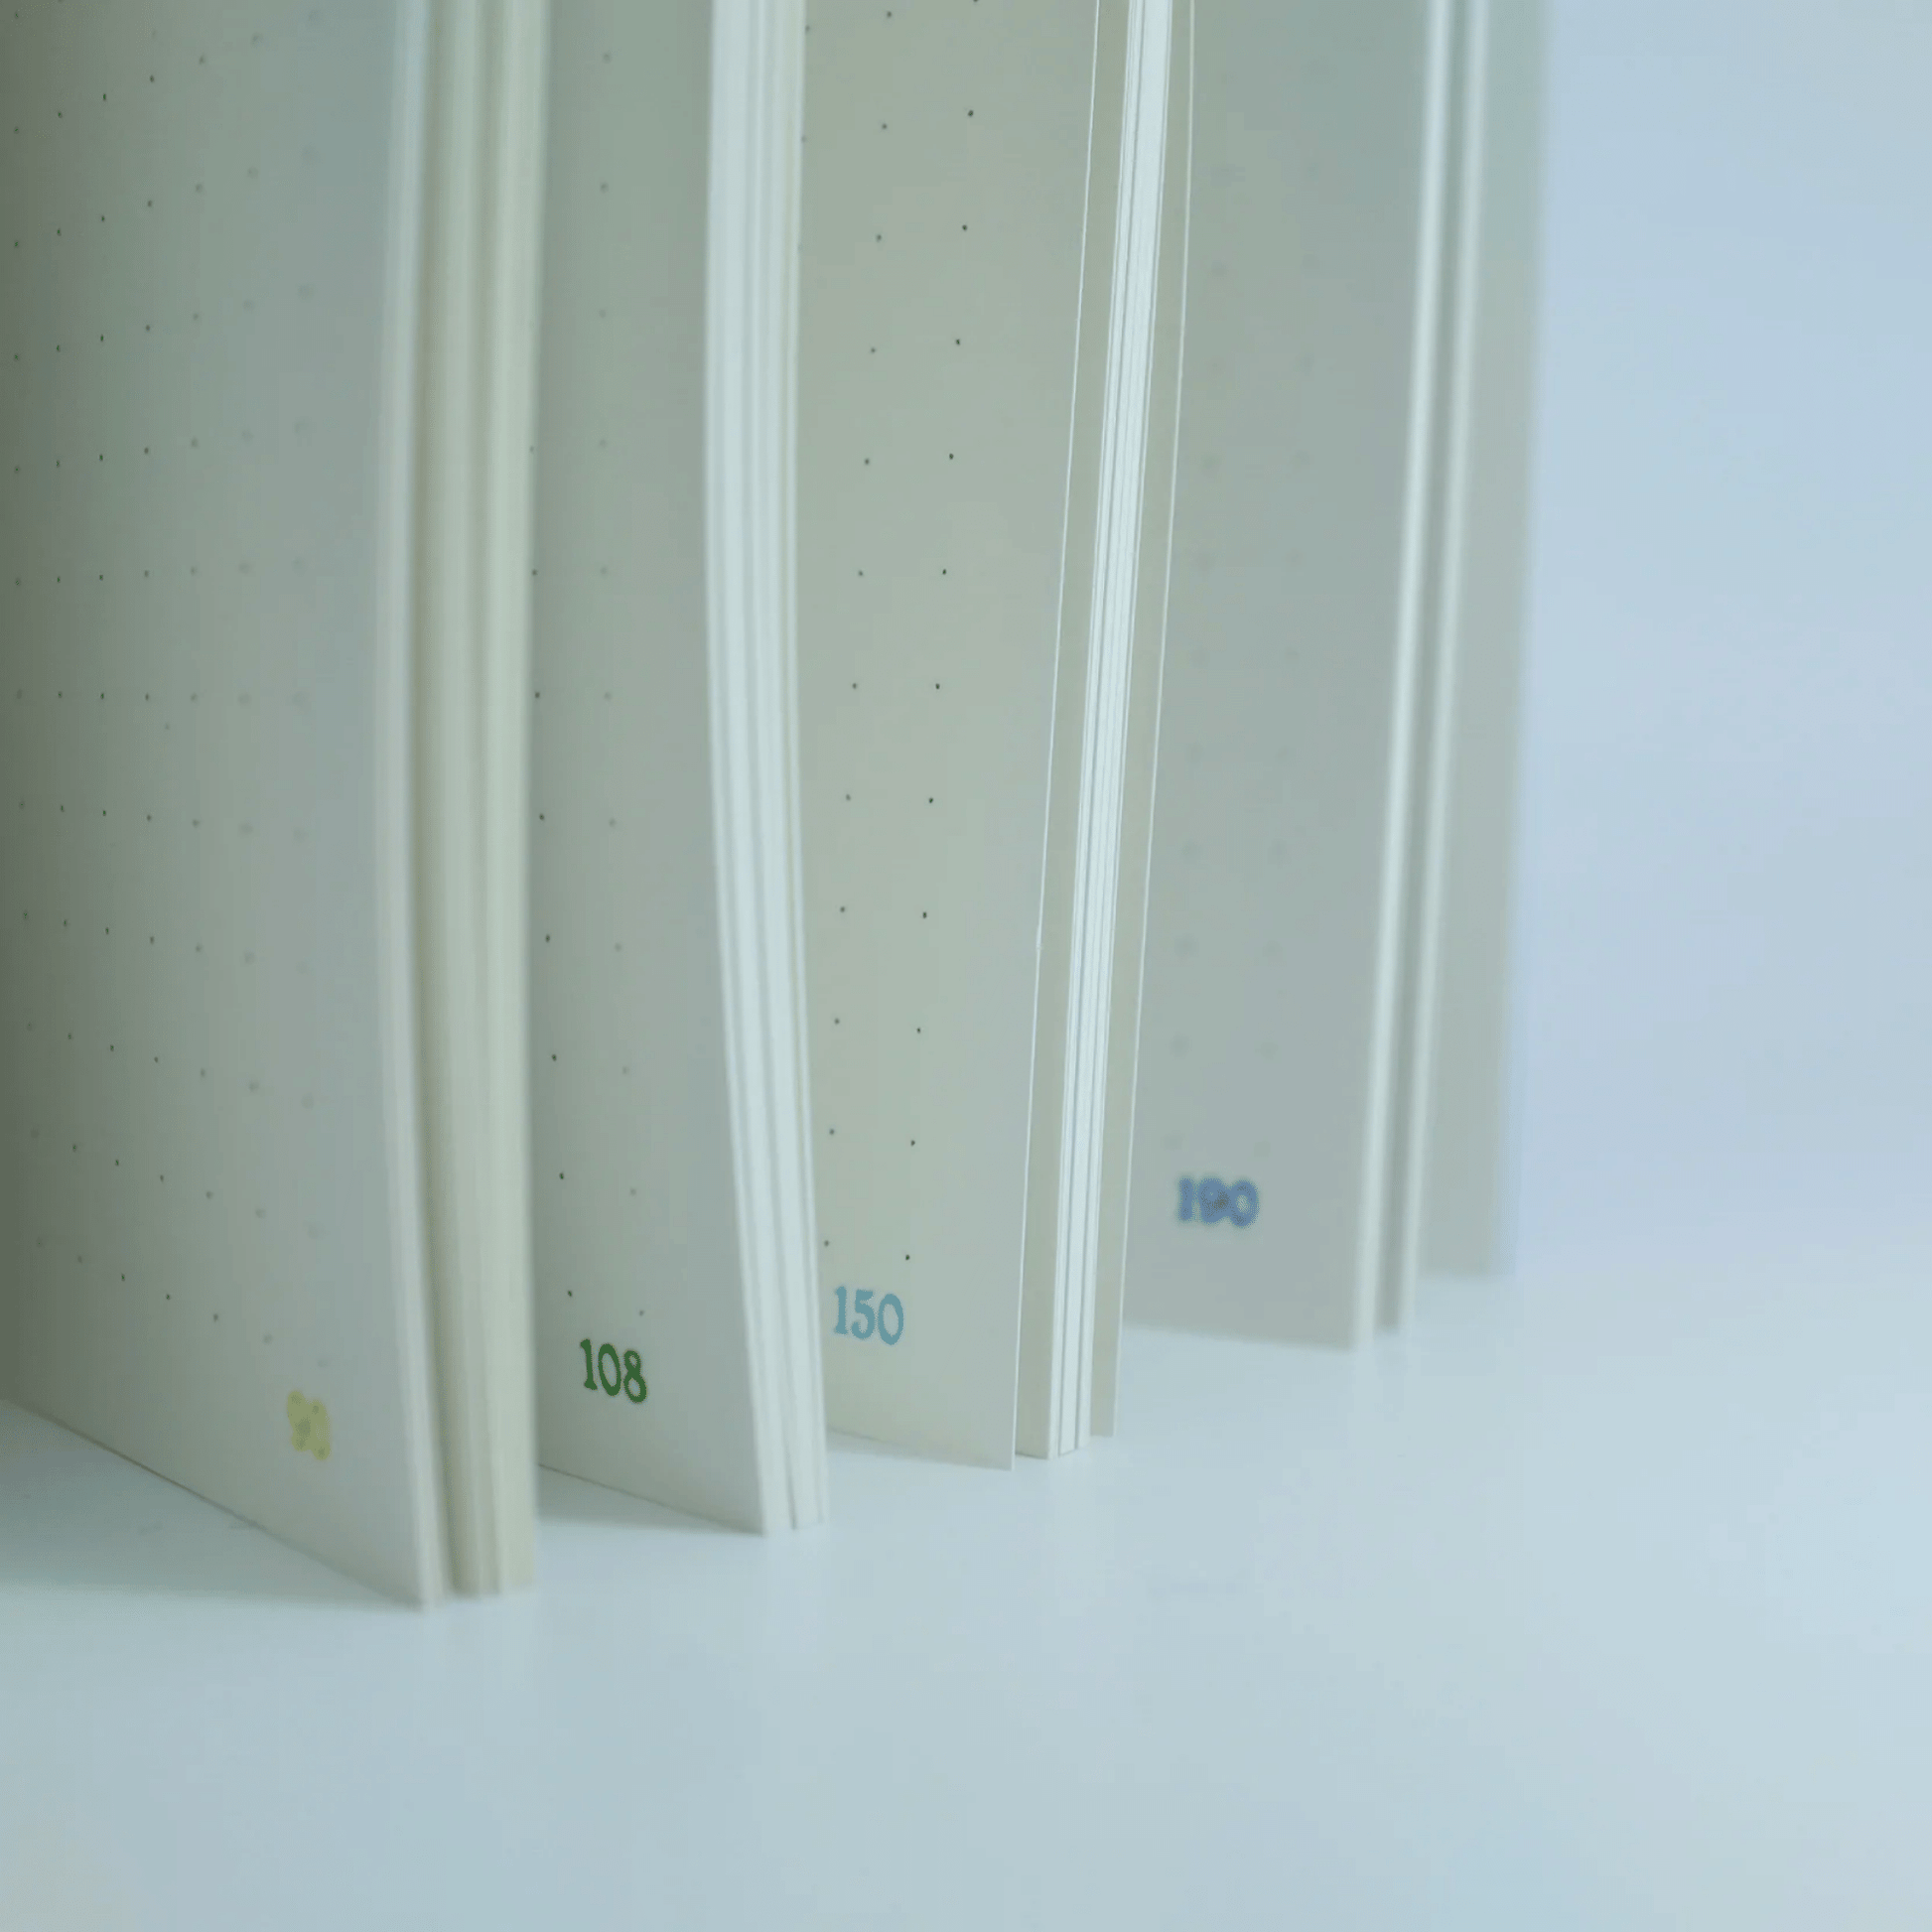 Coloured Page Numbers